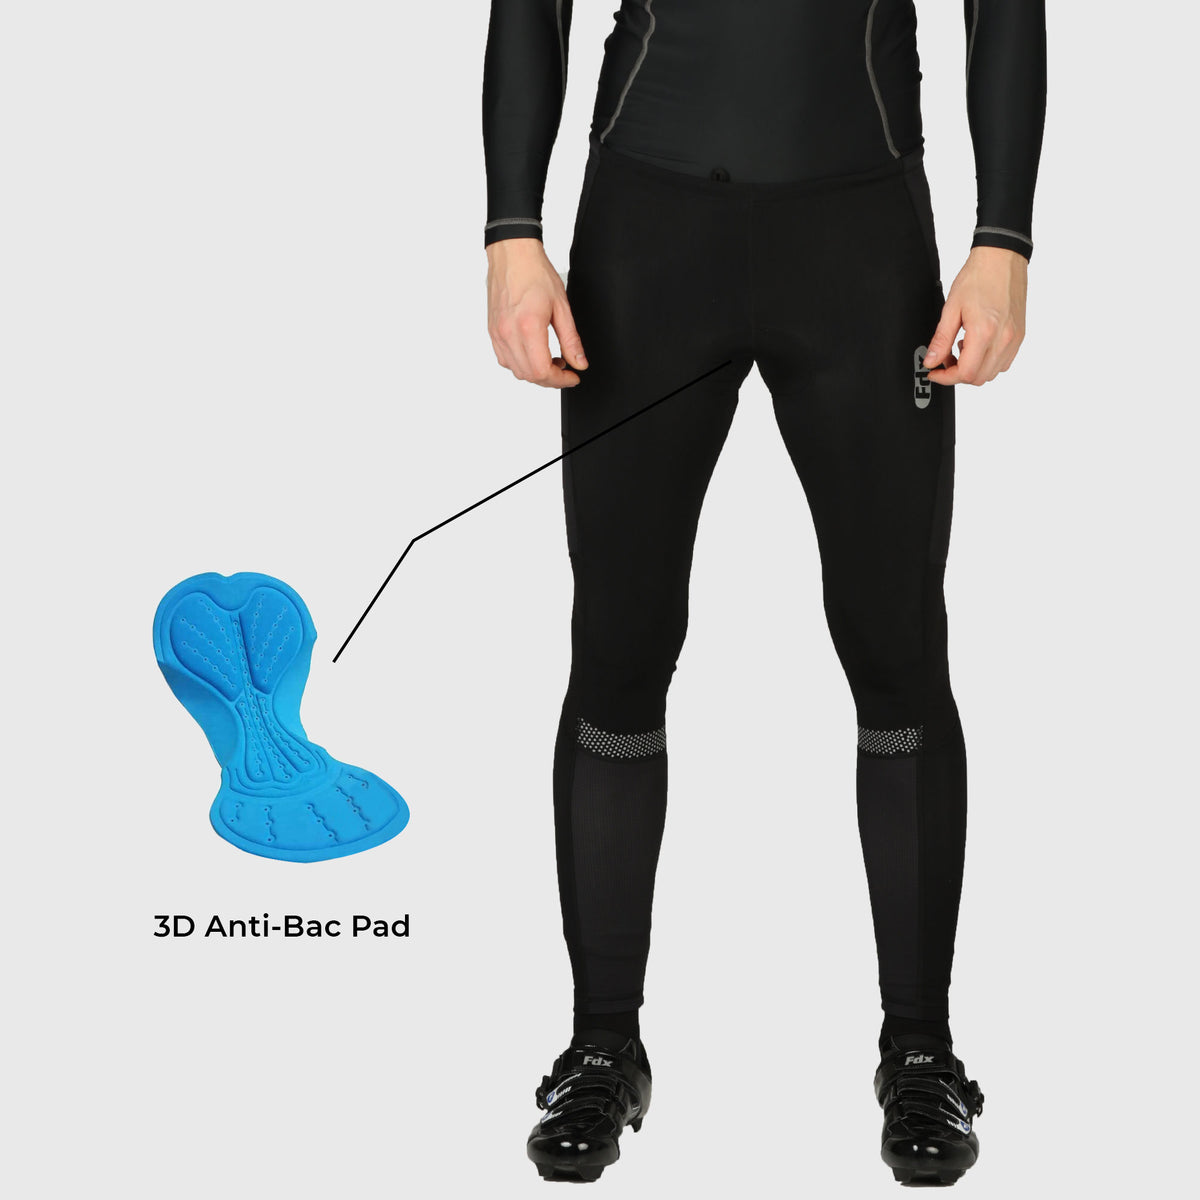 Fdx All Day Men's Padded Winter Cycling Tights Blue, Black & Red